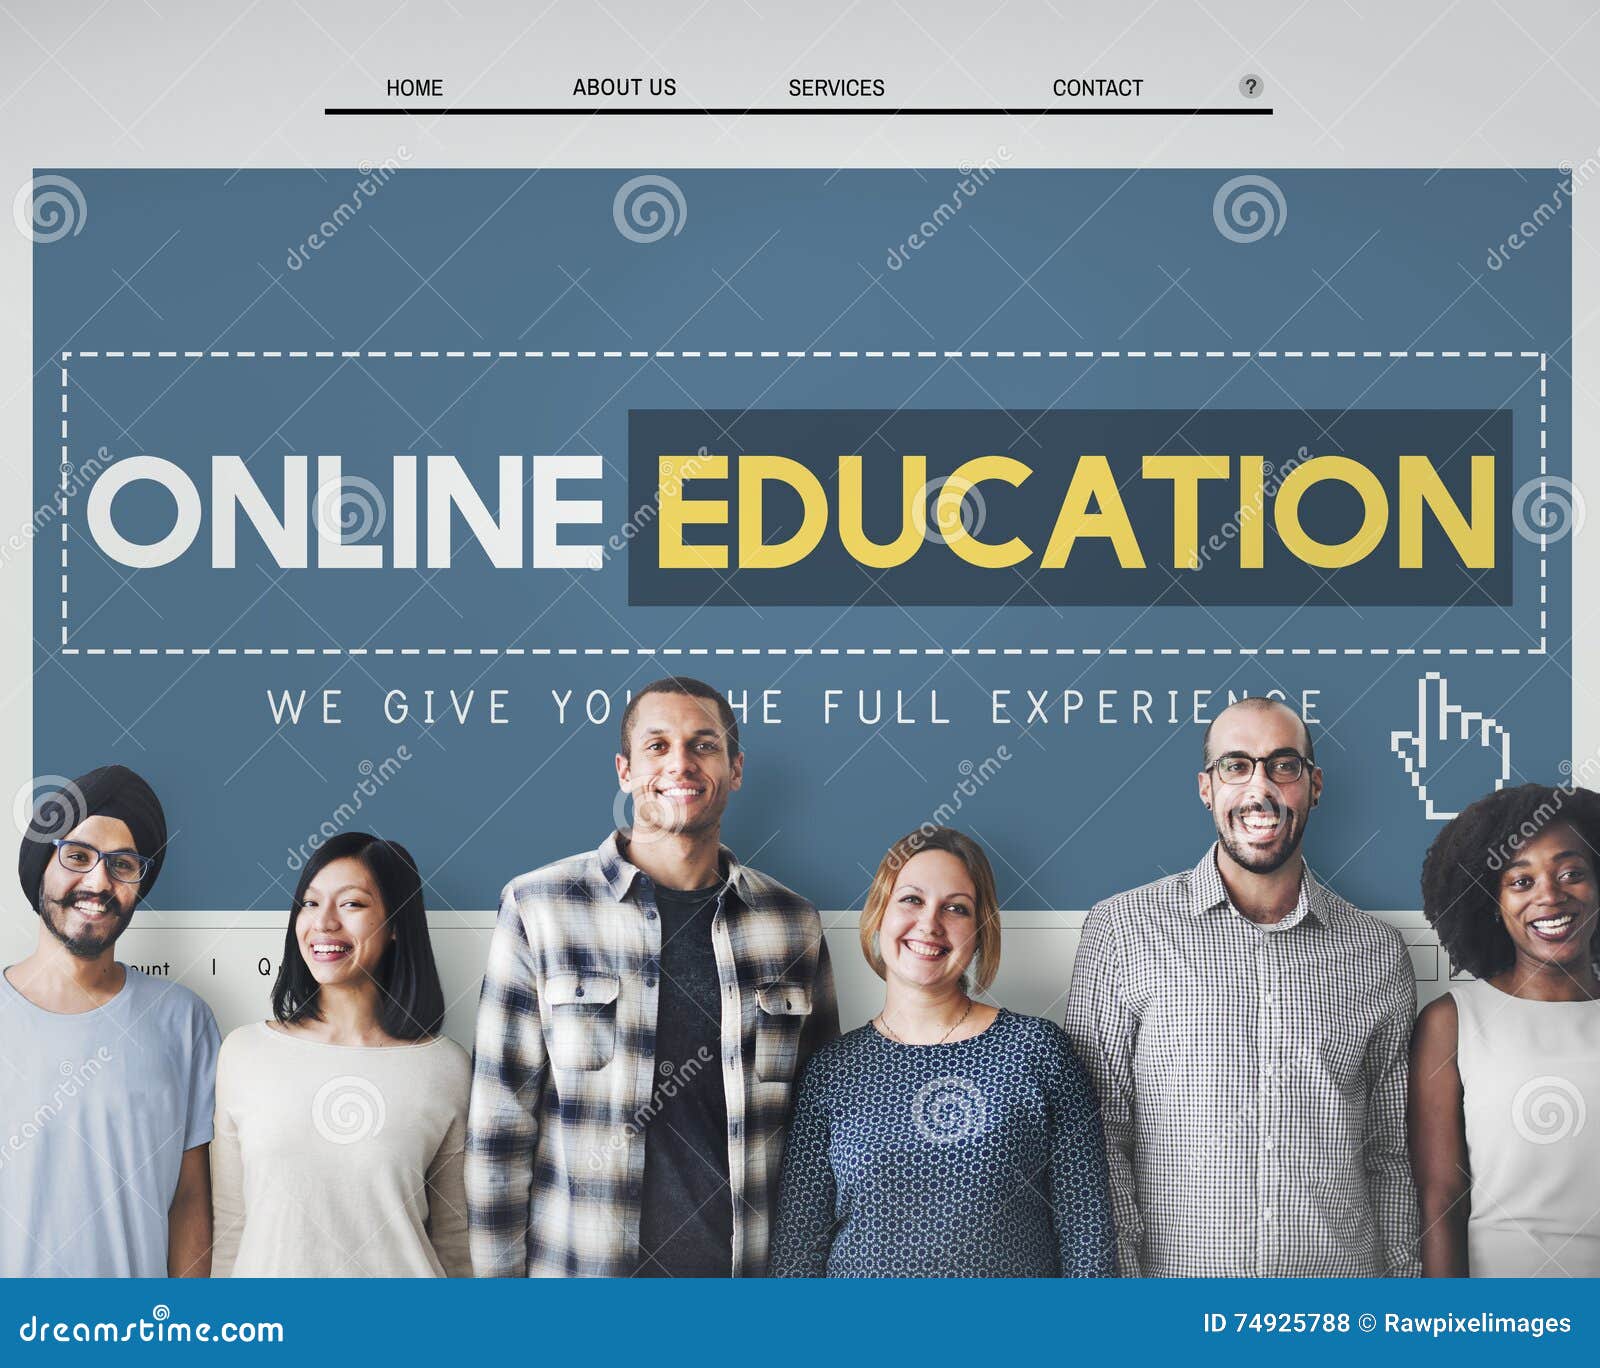 online education homepage e-learning technology concept